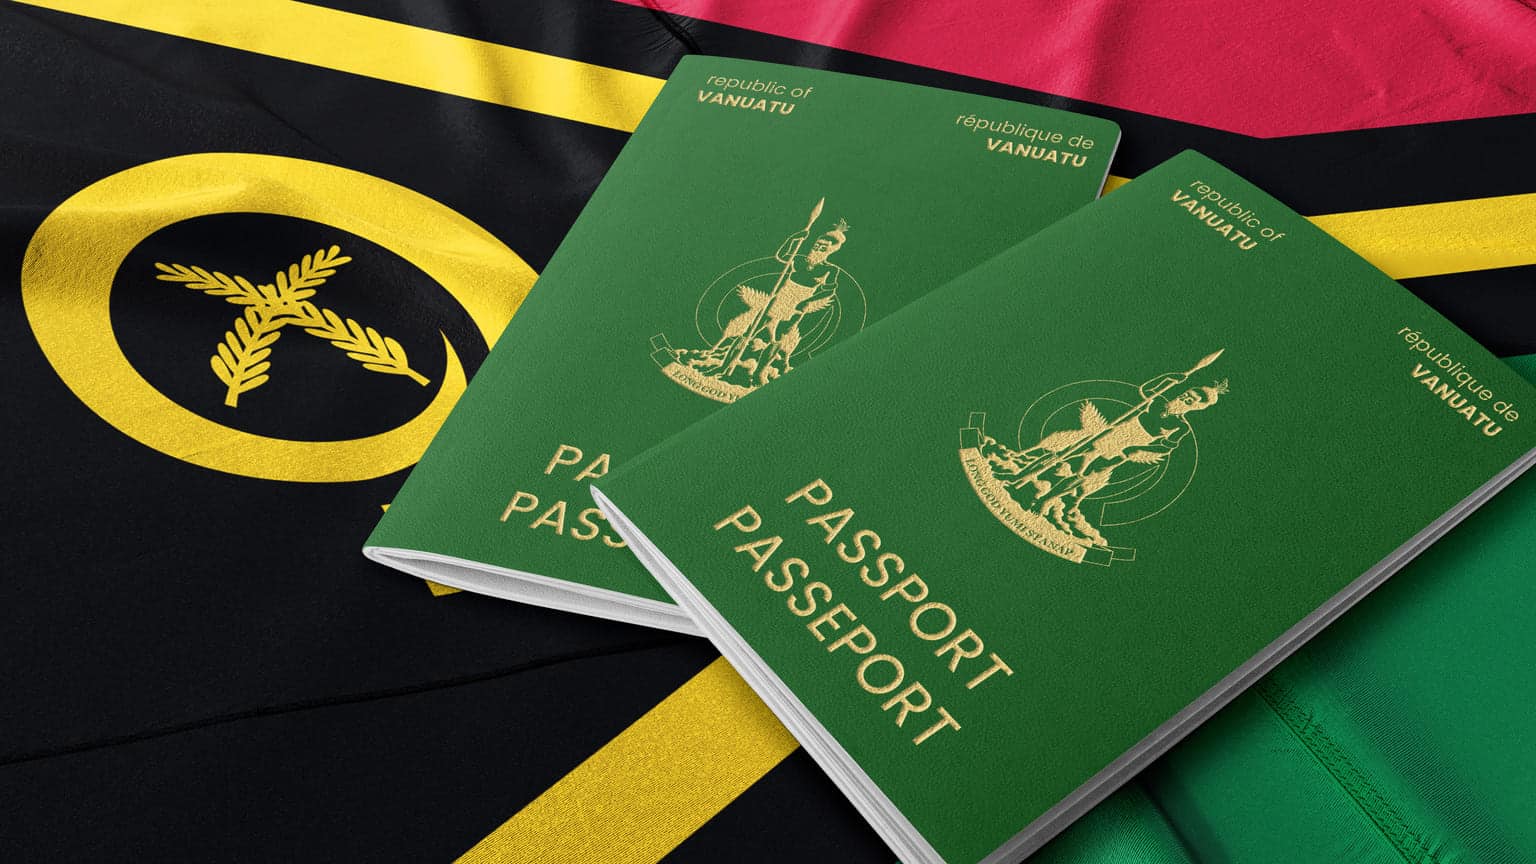 Policy recommendations for the Vanuatu Citizenship by Investment program